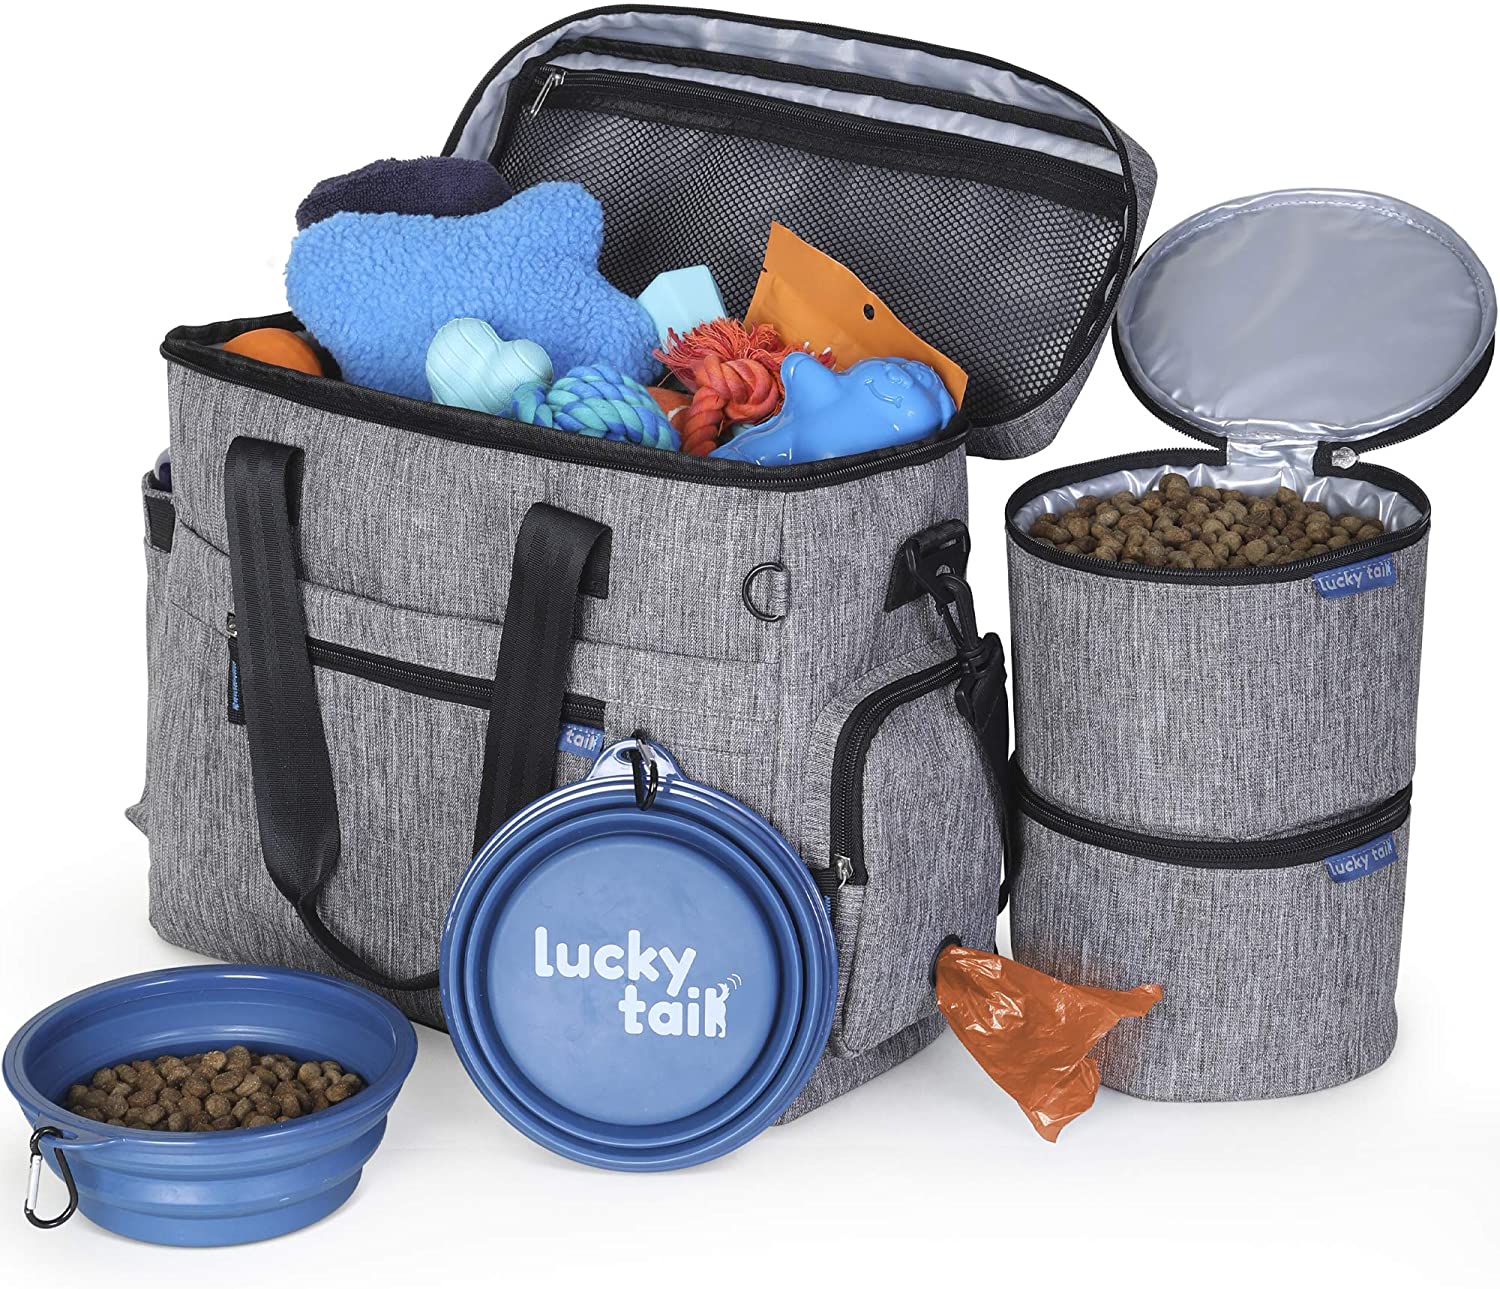 Dog Travel Bag For Supplies By Lucky Tail | MoonDogReviews.com